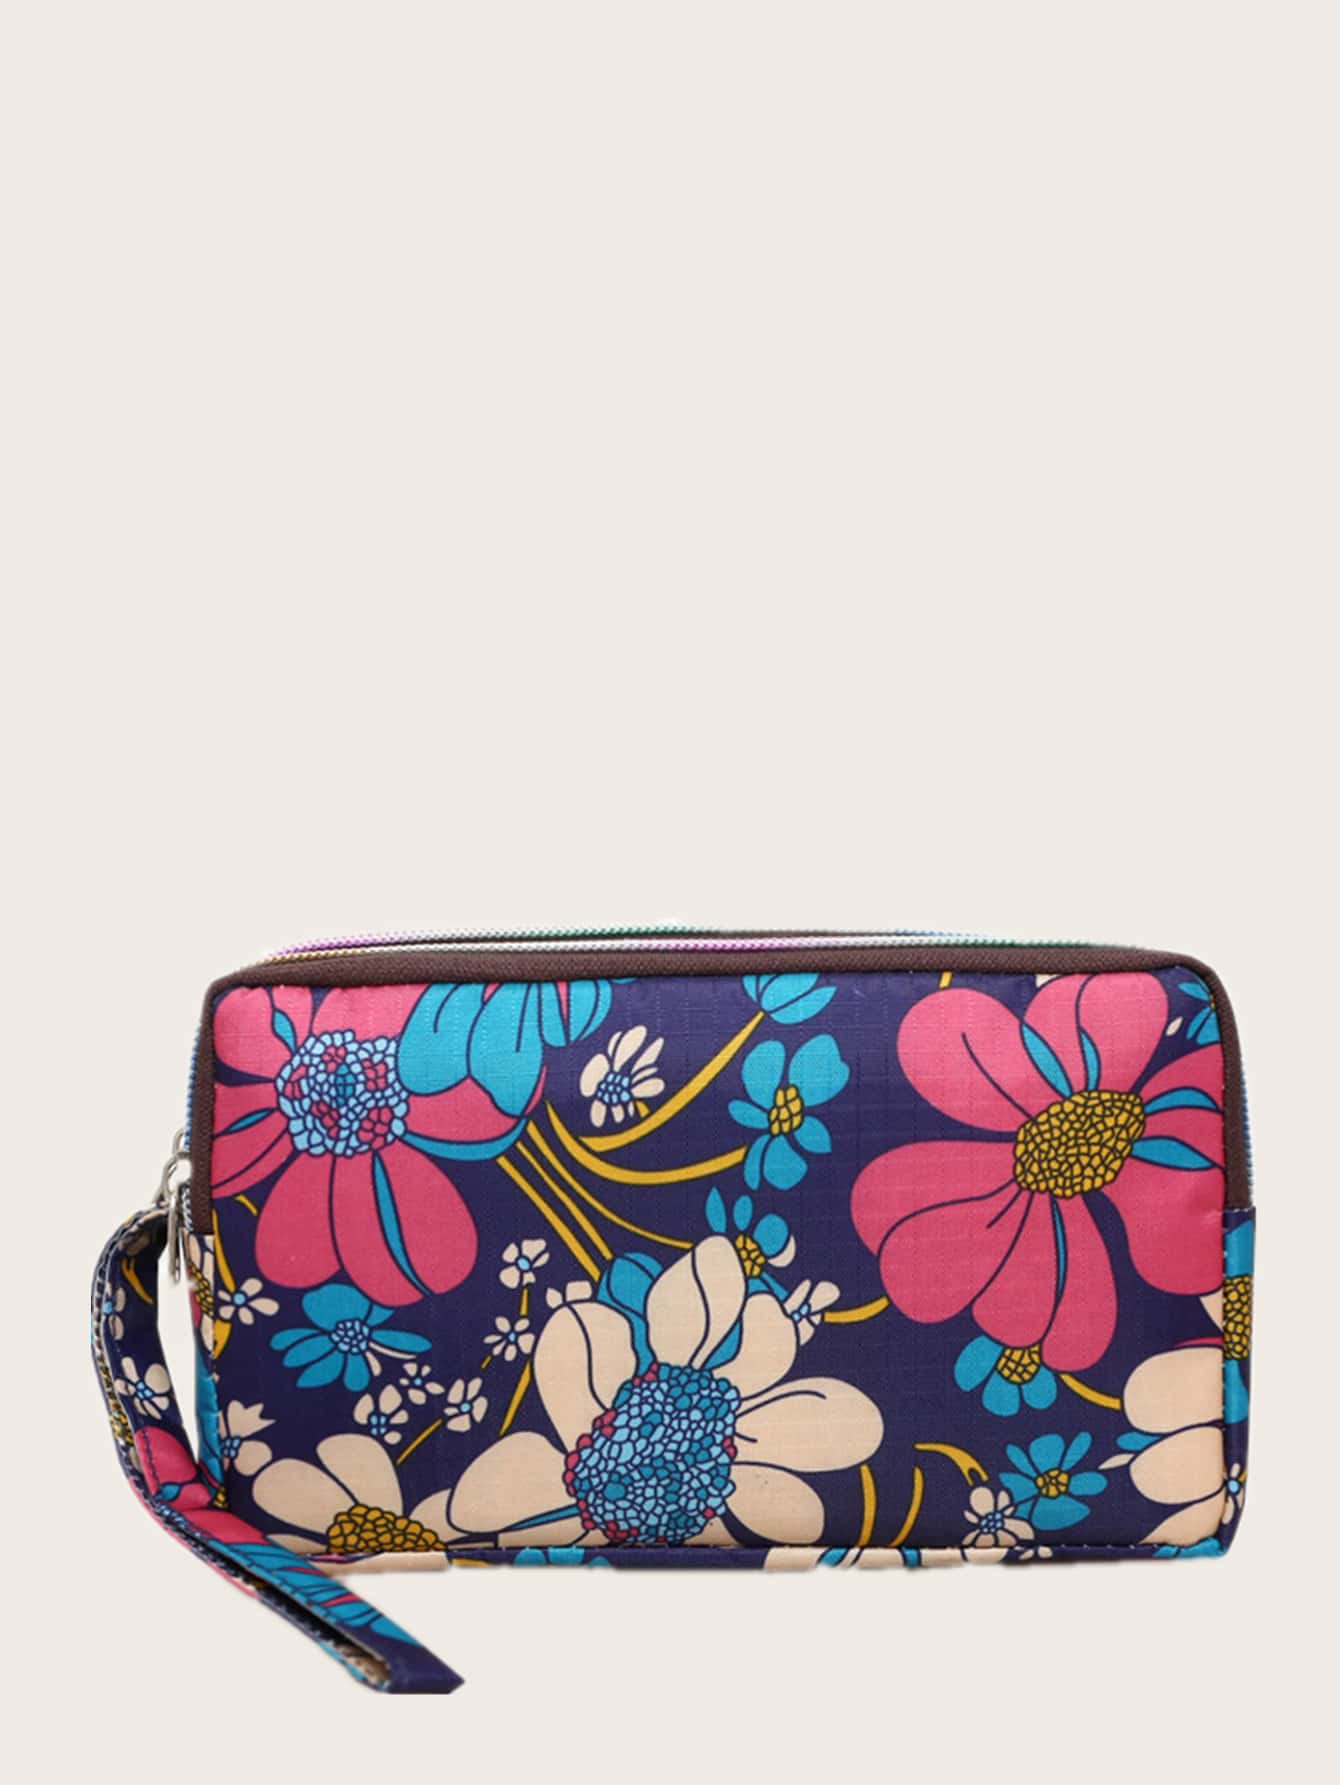 Floral Graphic Clutch Bag With Wristlet